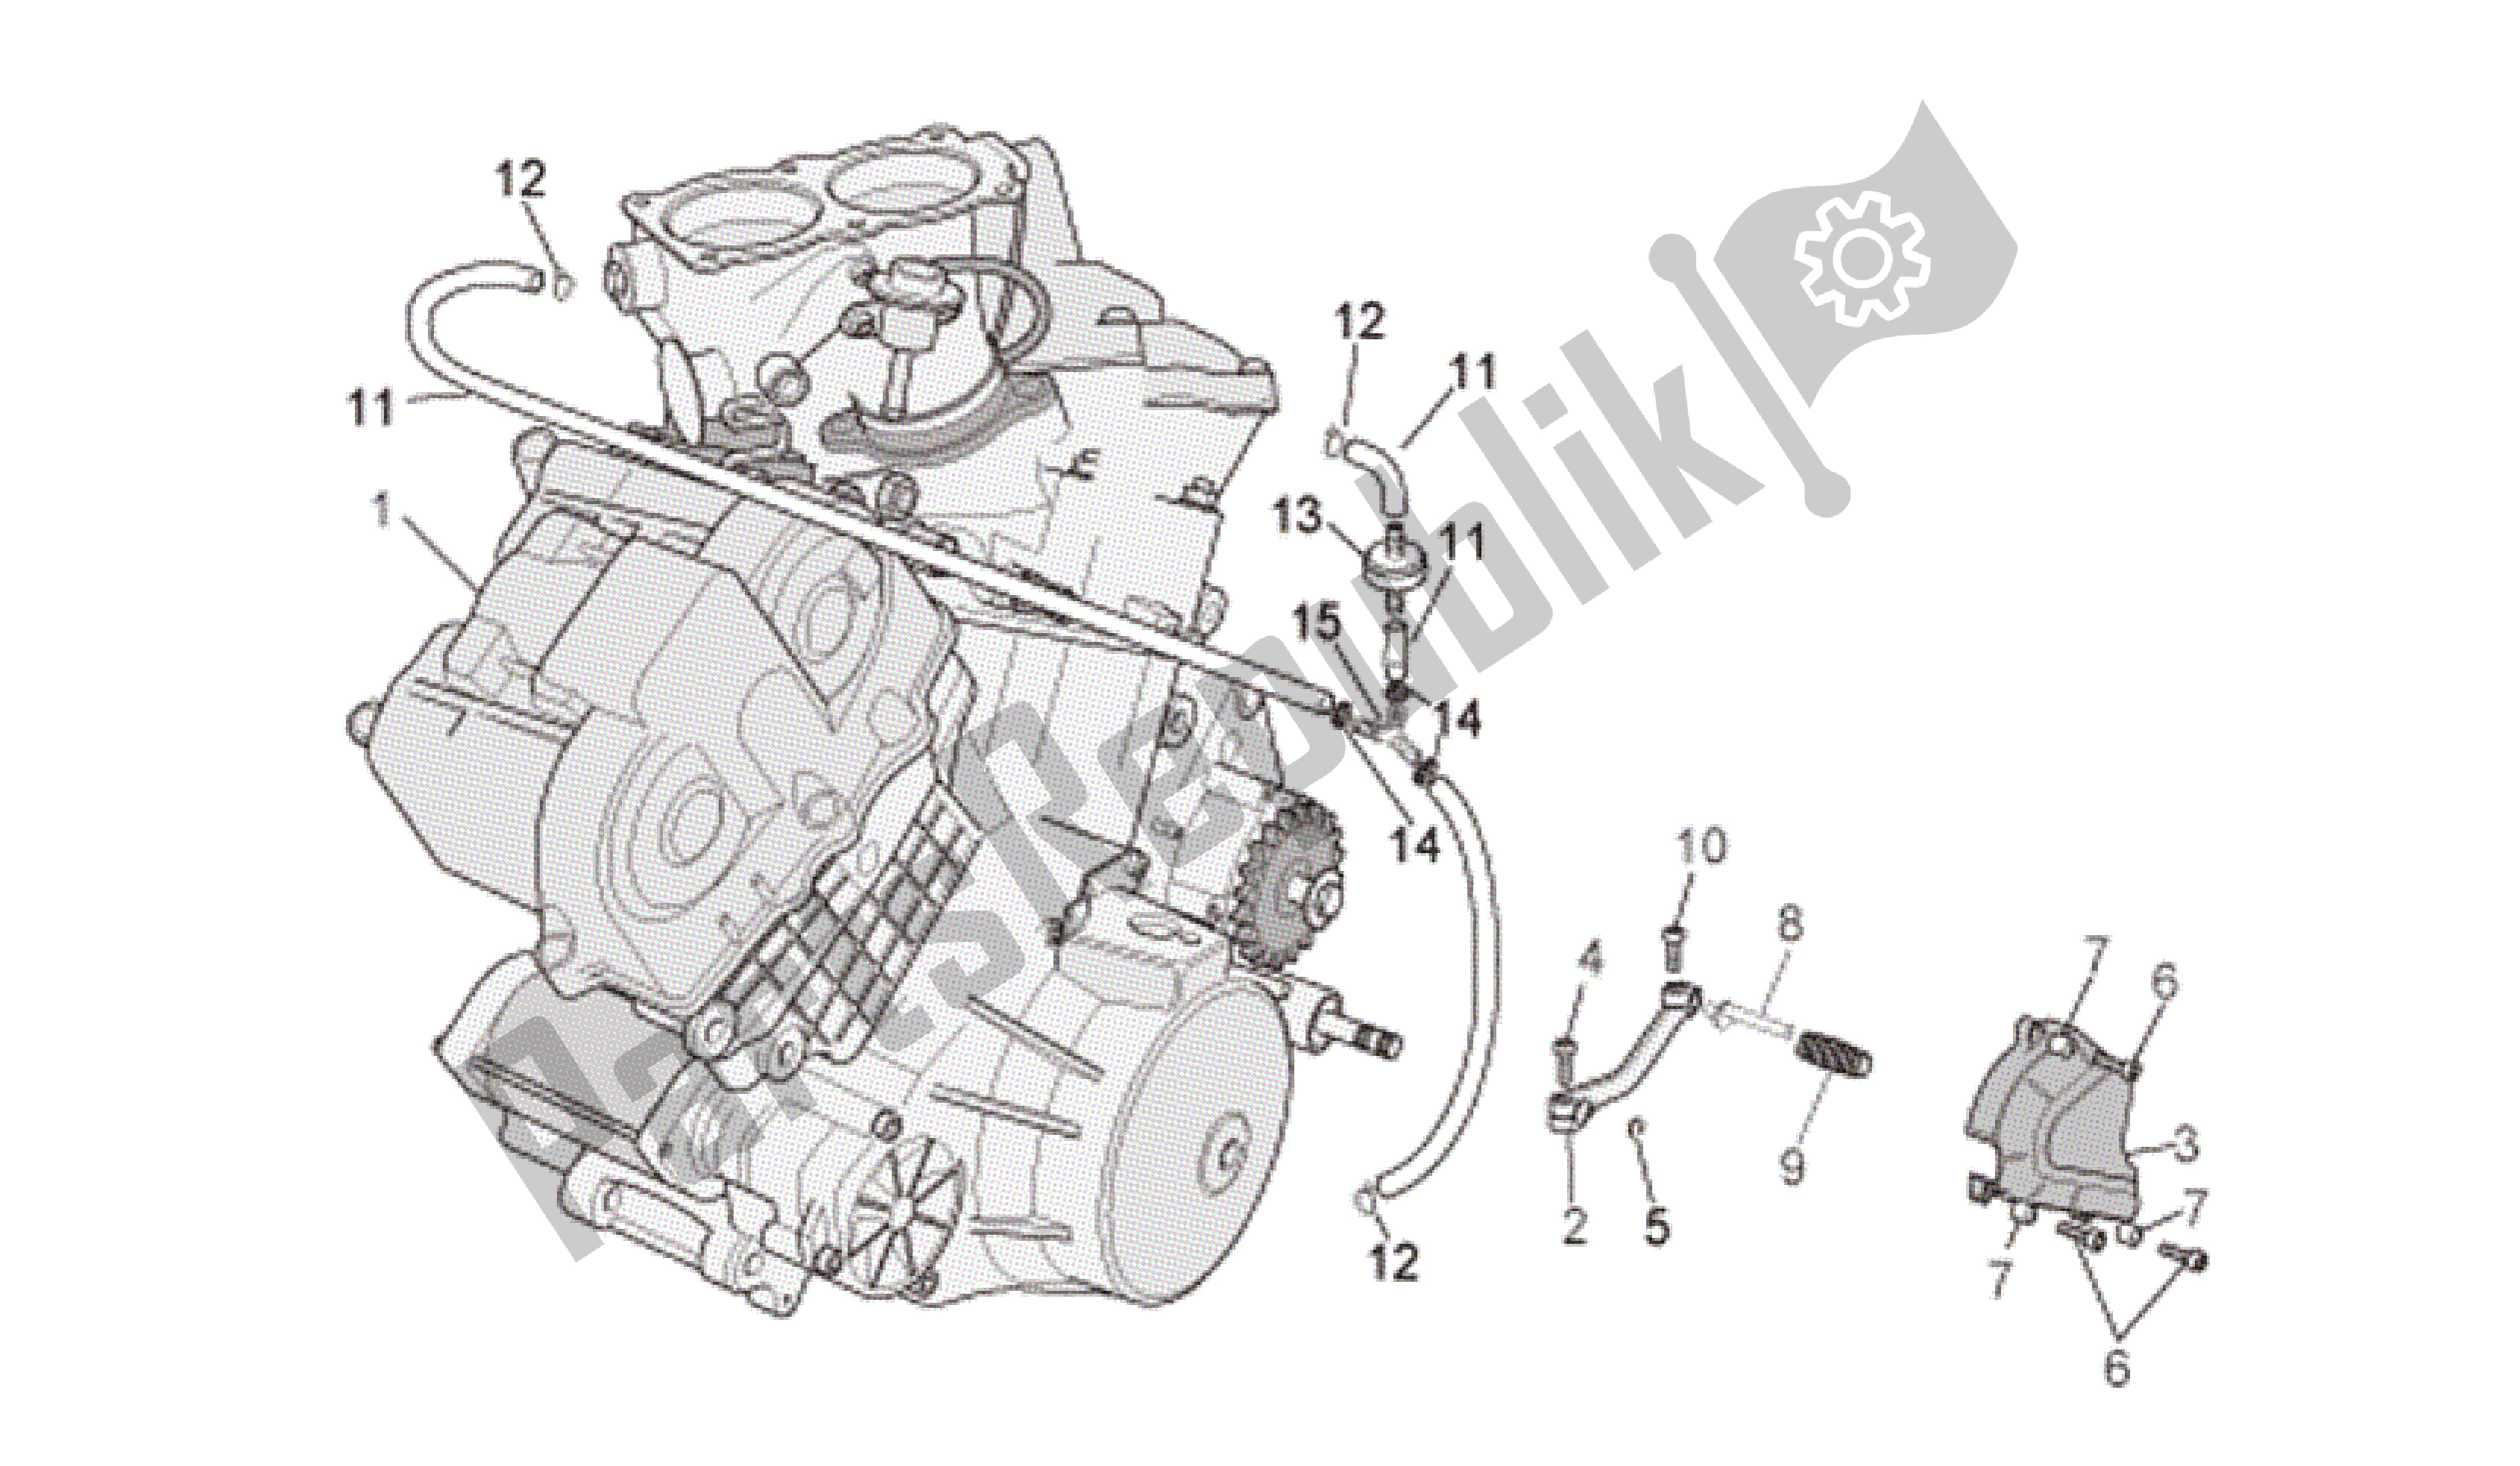 All parts for the Engine of the Aprilia RSV Tuono Factory 3985 1000 2006 - 2009